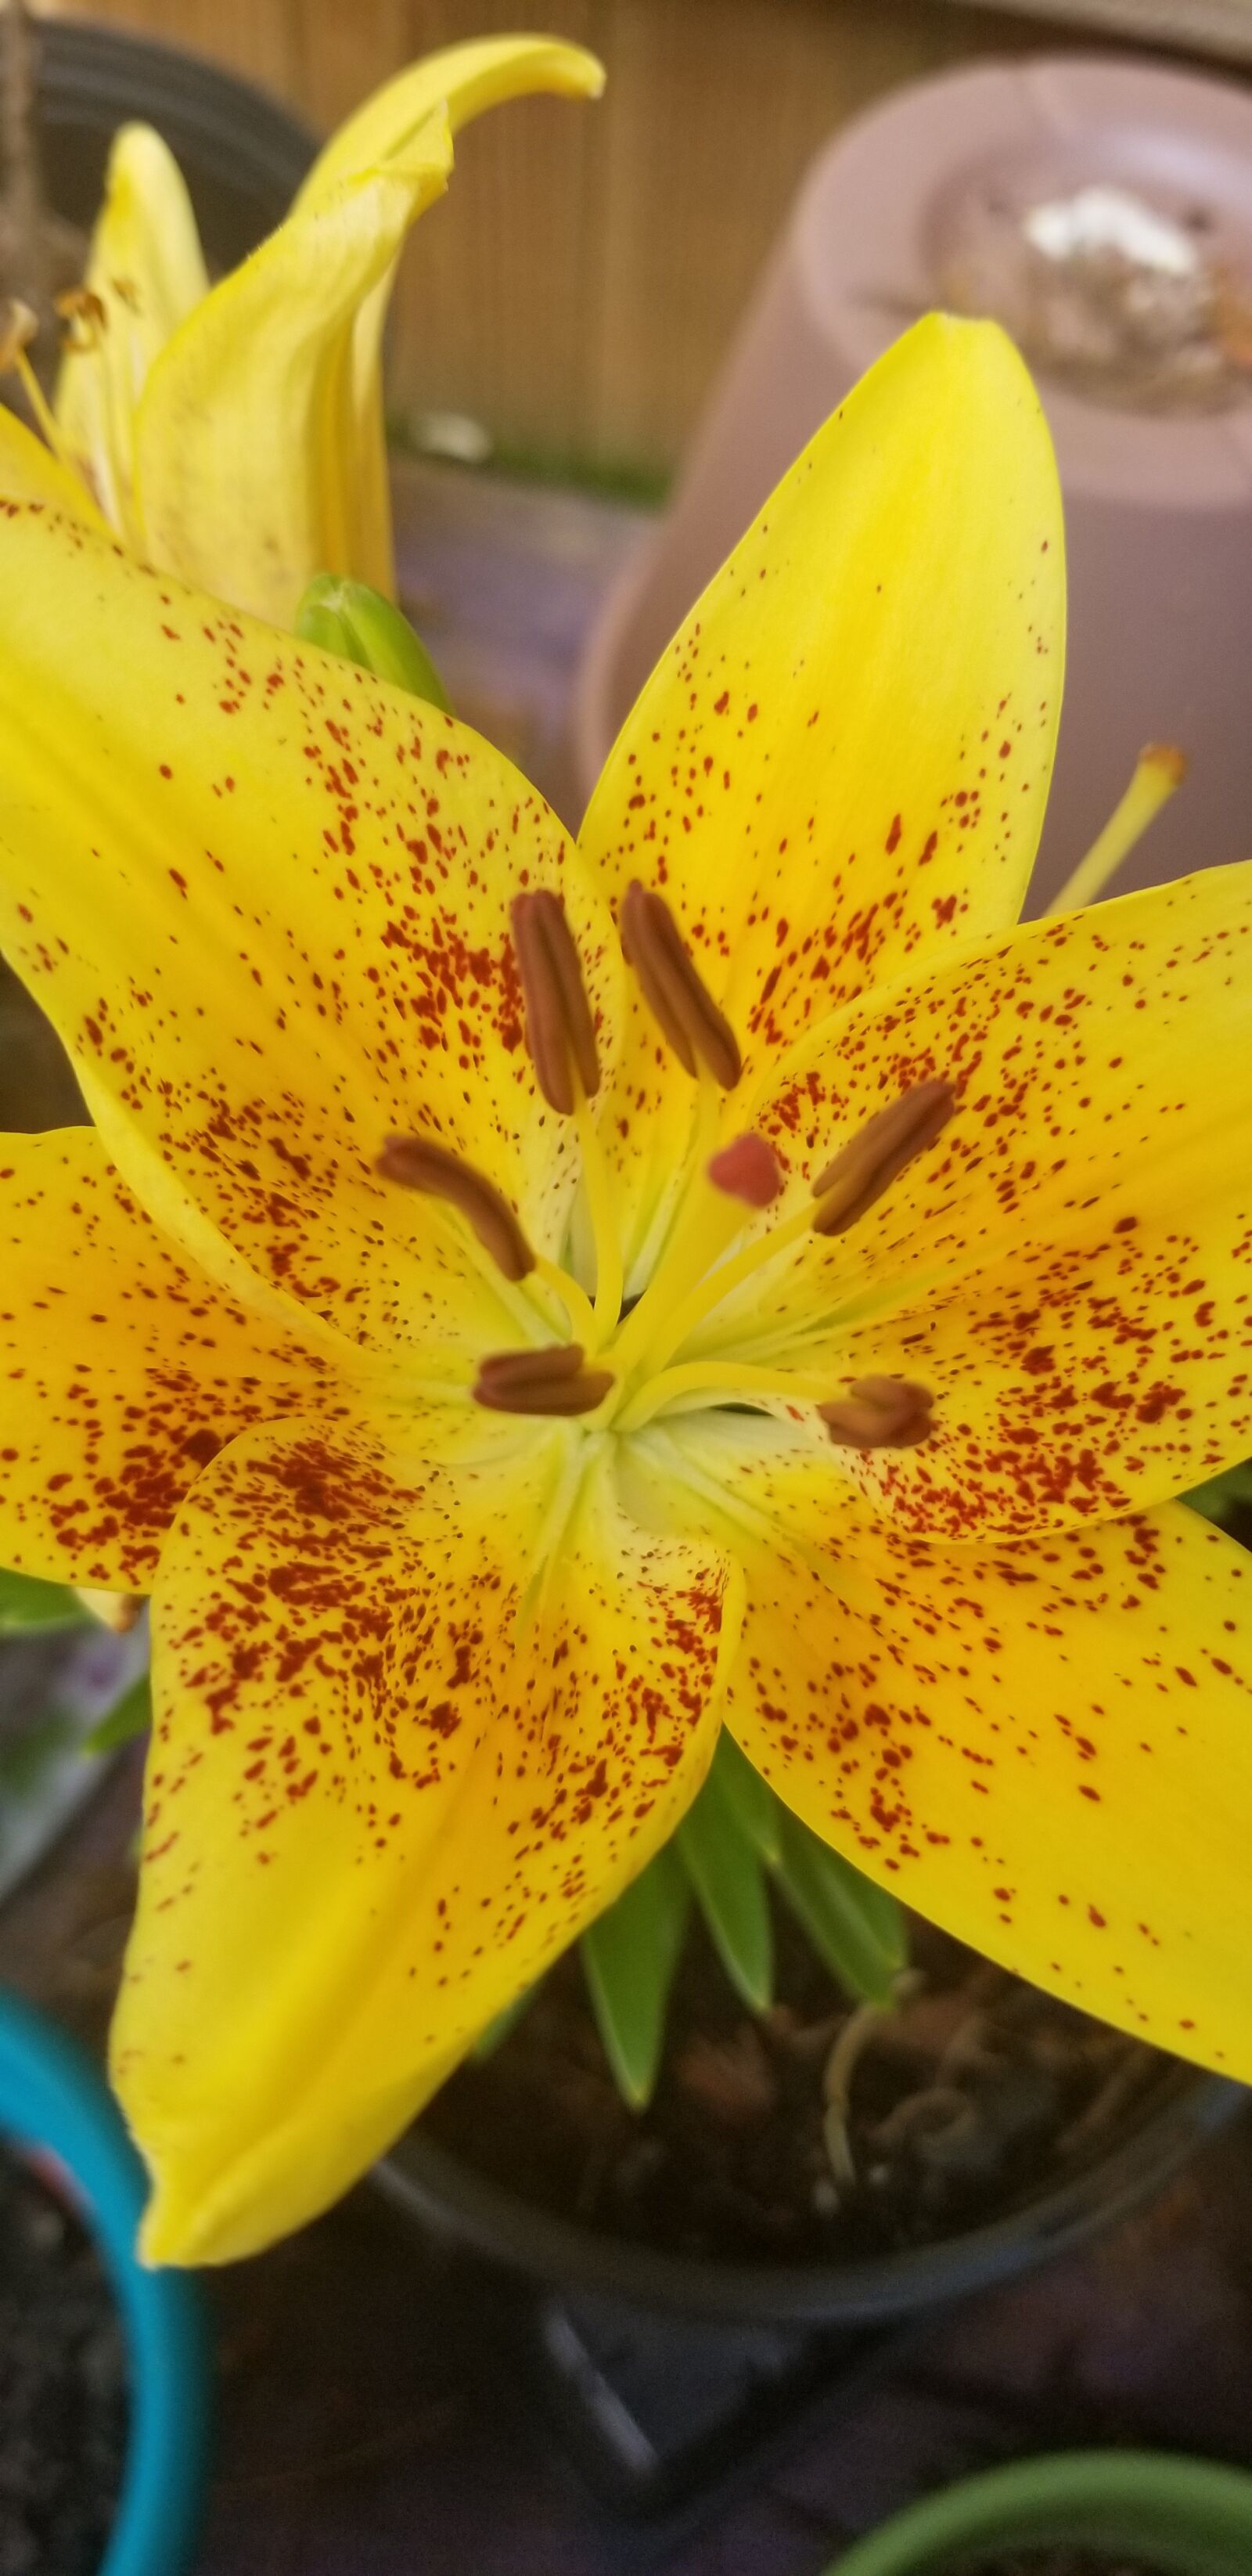 Samsung Galaxy S8+ sample photo. Lilly, flower, yellow photography